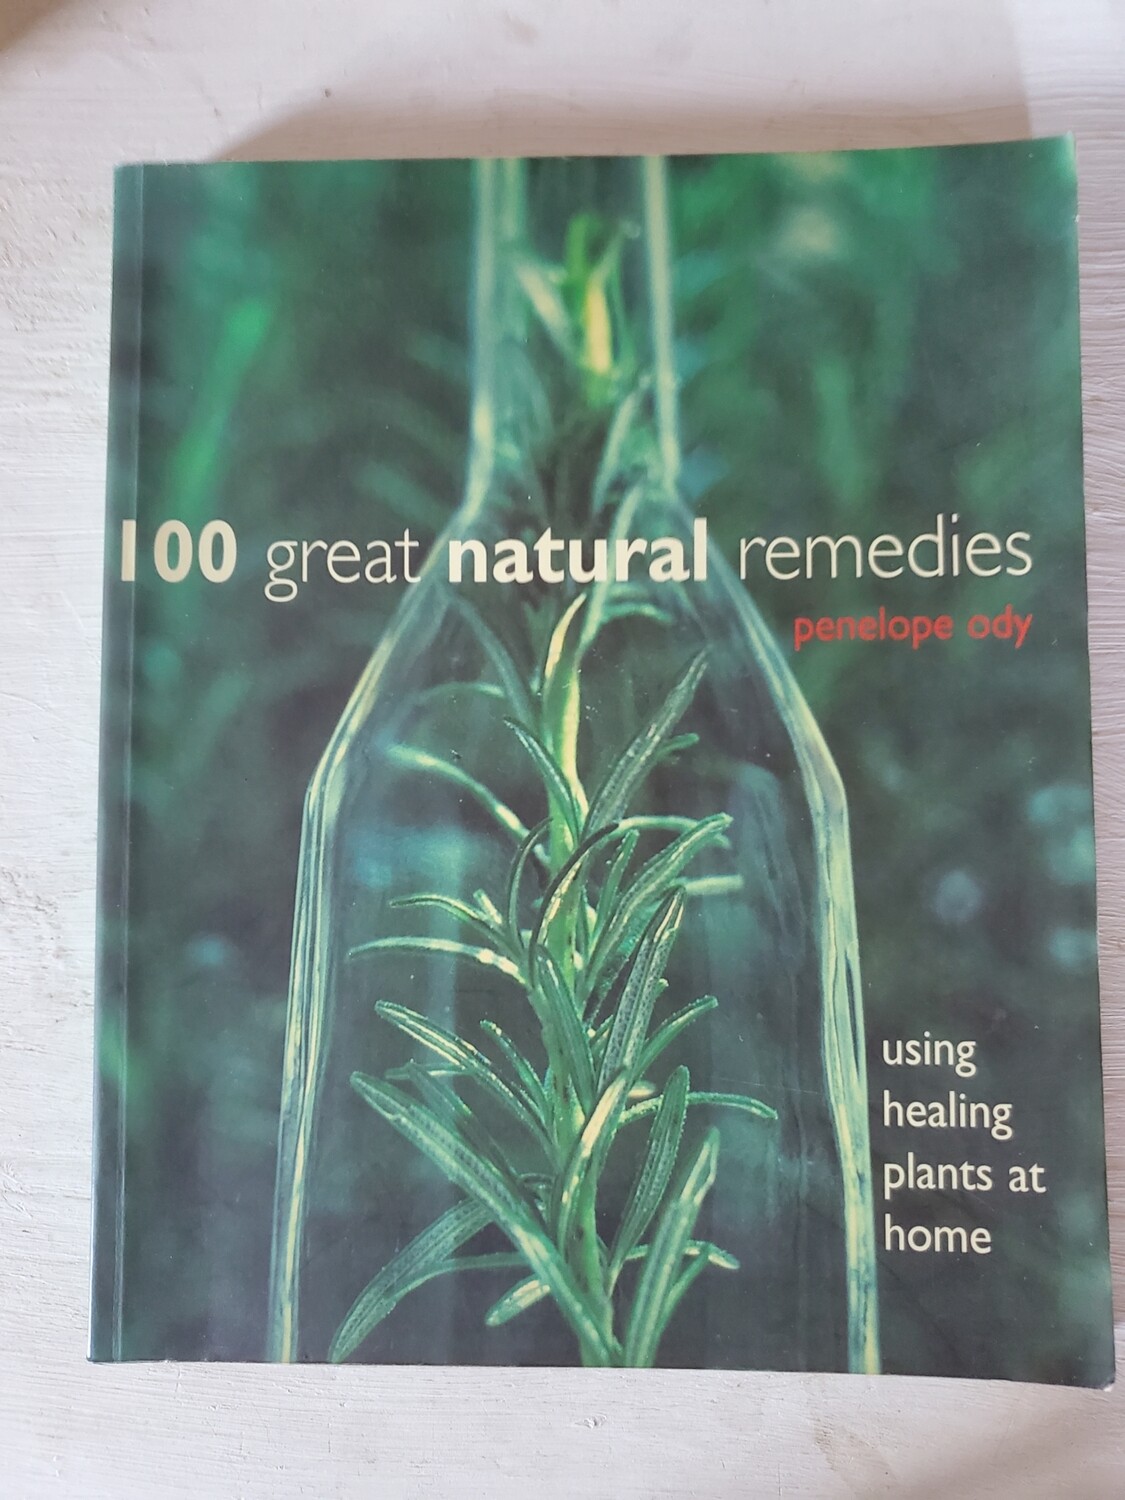 100 great natural remedies, Penelope Ody